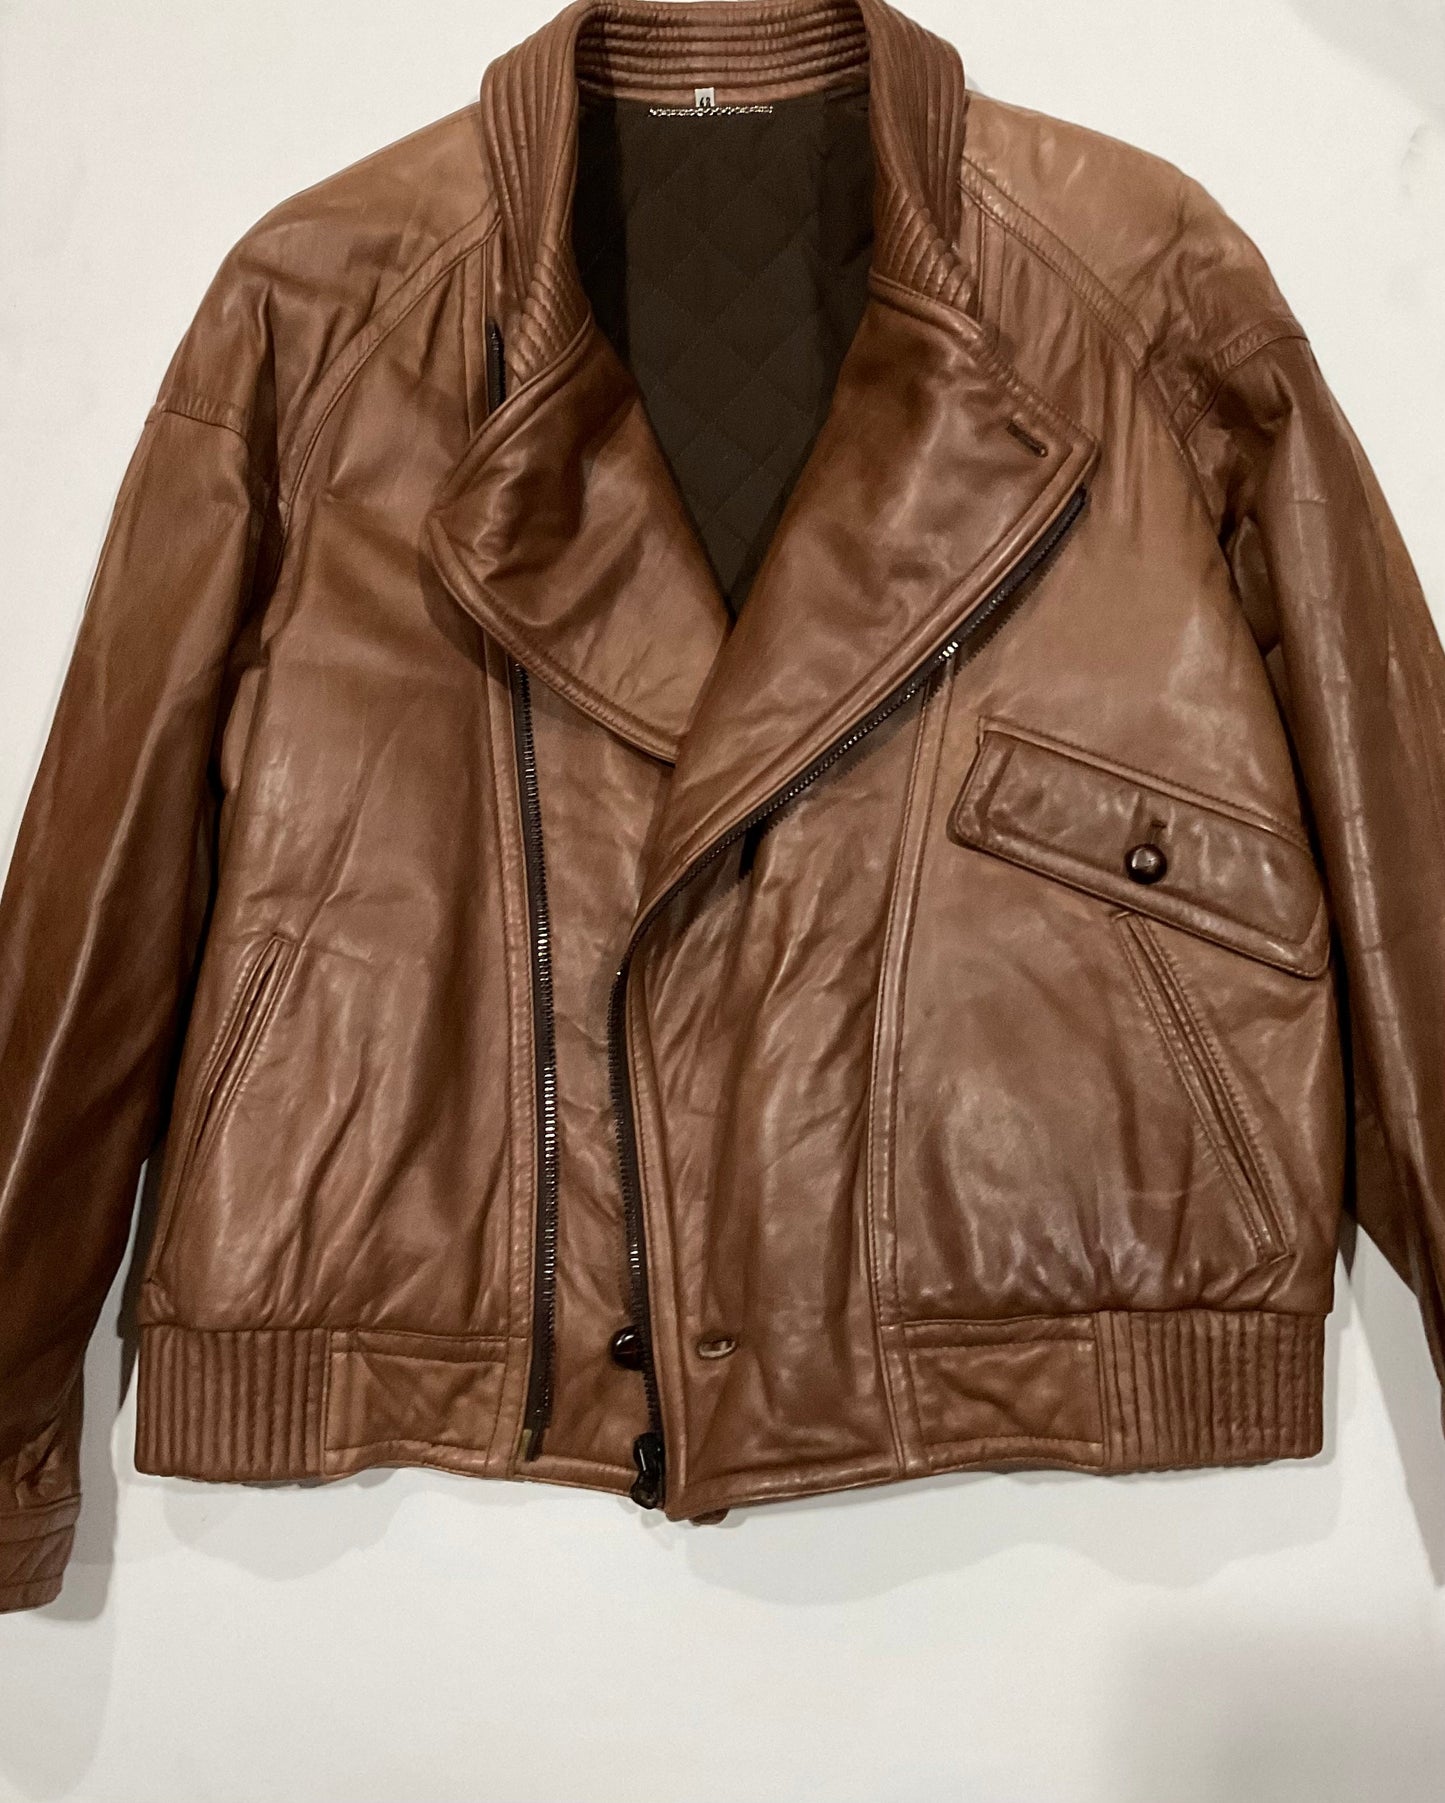 R P LEATHER JACKET / BROWN / MEDIUM / MADE IN ITALY